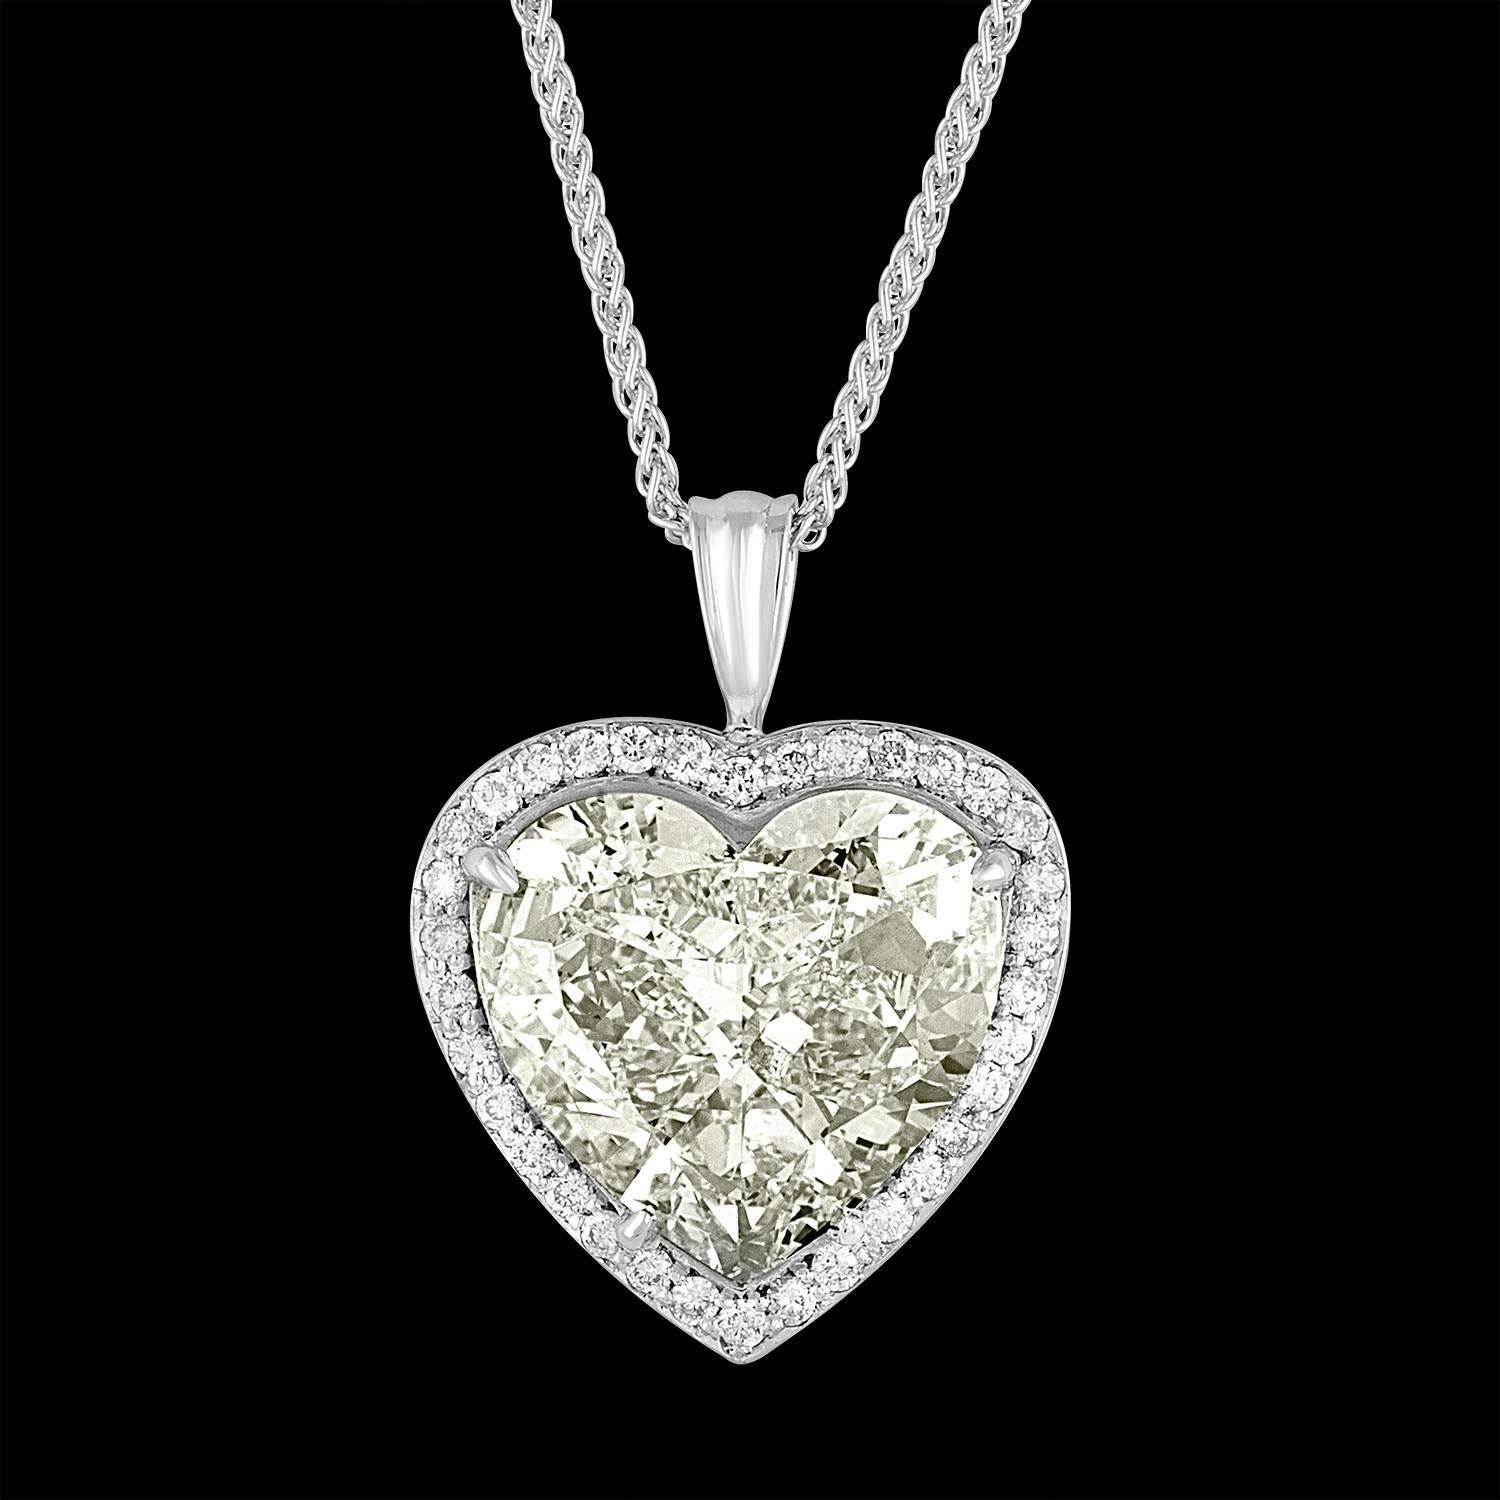 A 7.05 Carat Heart Shape GIA certified as J in Color and VS2 in Clarity is set in 18K White Gold Pendant with 0.44 Carat Total Weight of small Diamonds around it.
GIA certificate # 2165160290